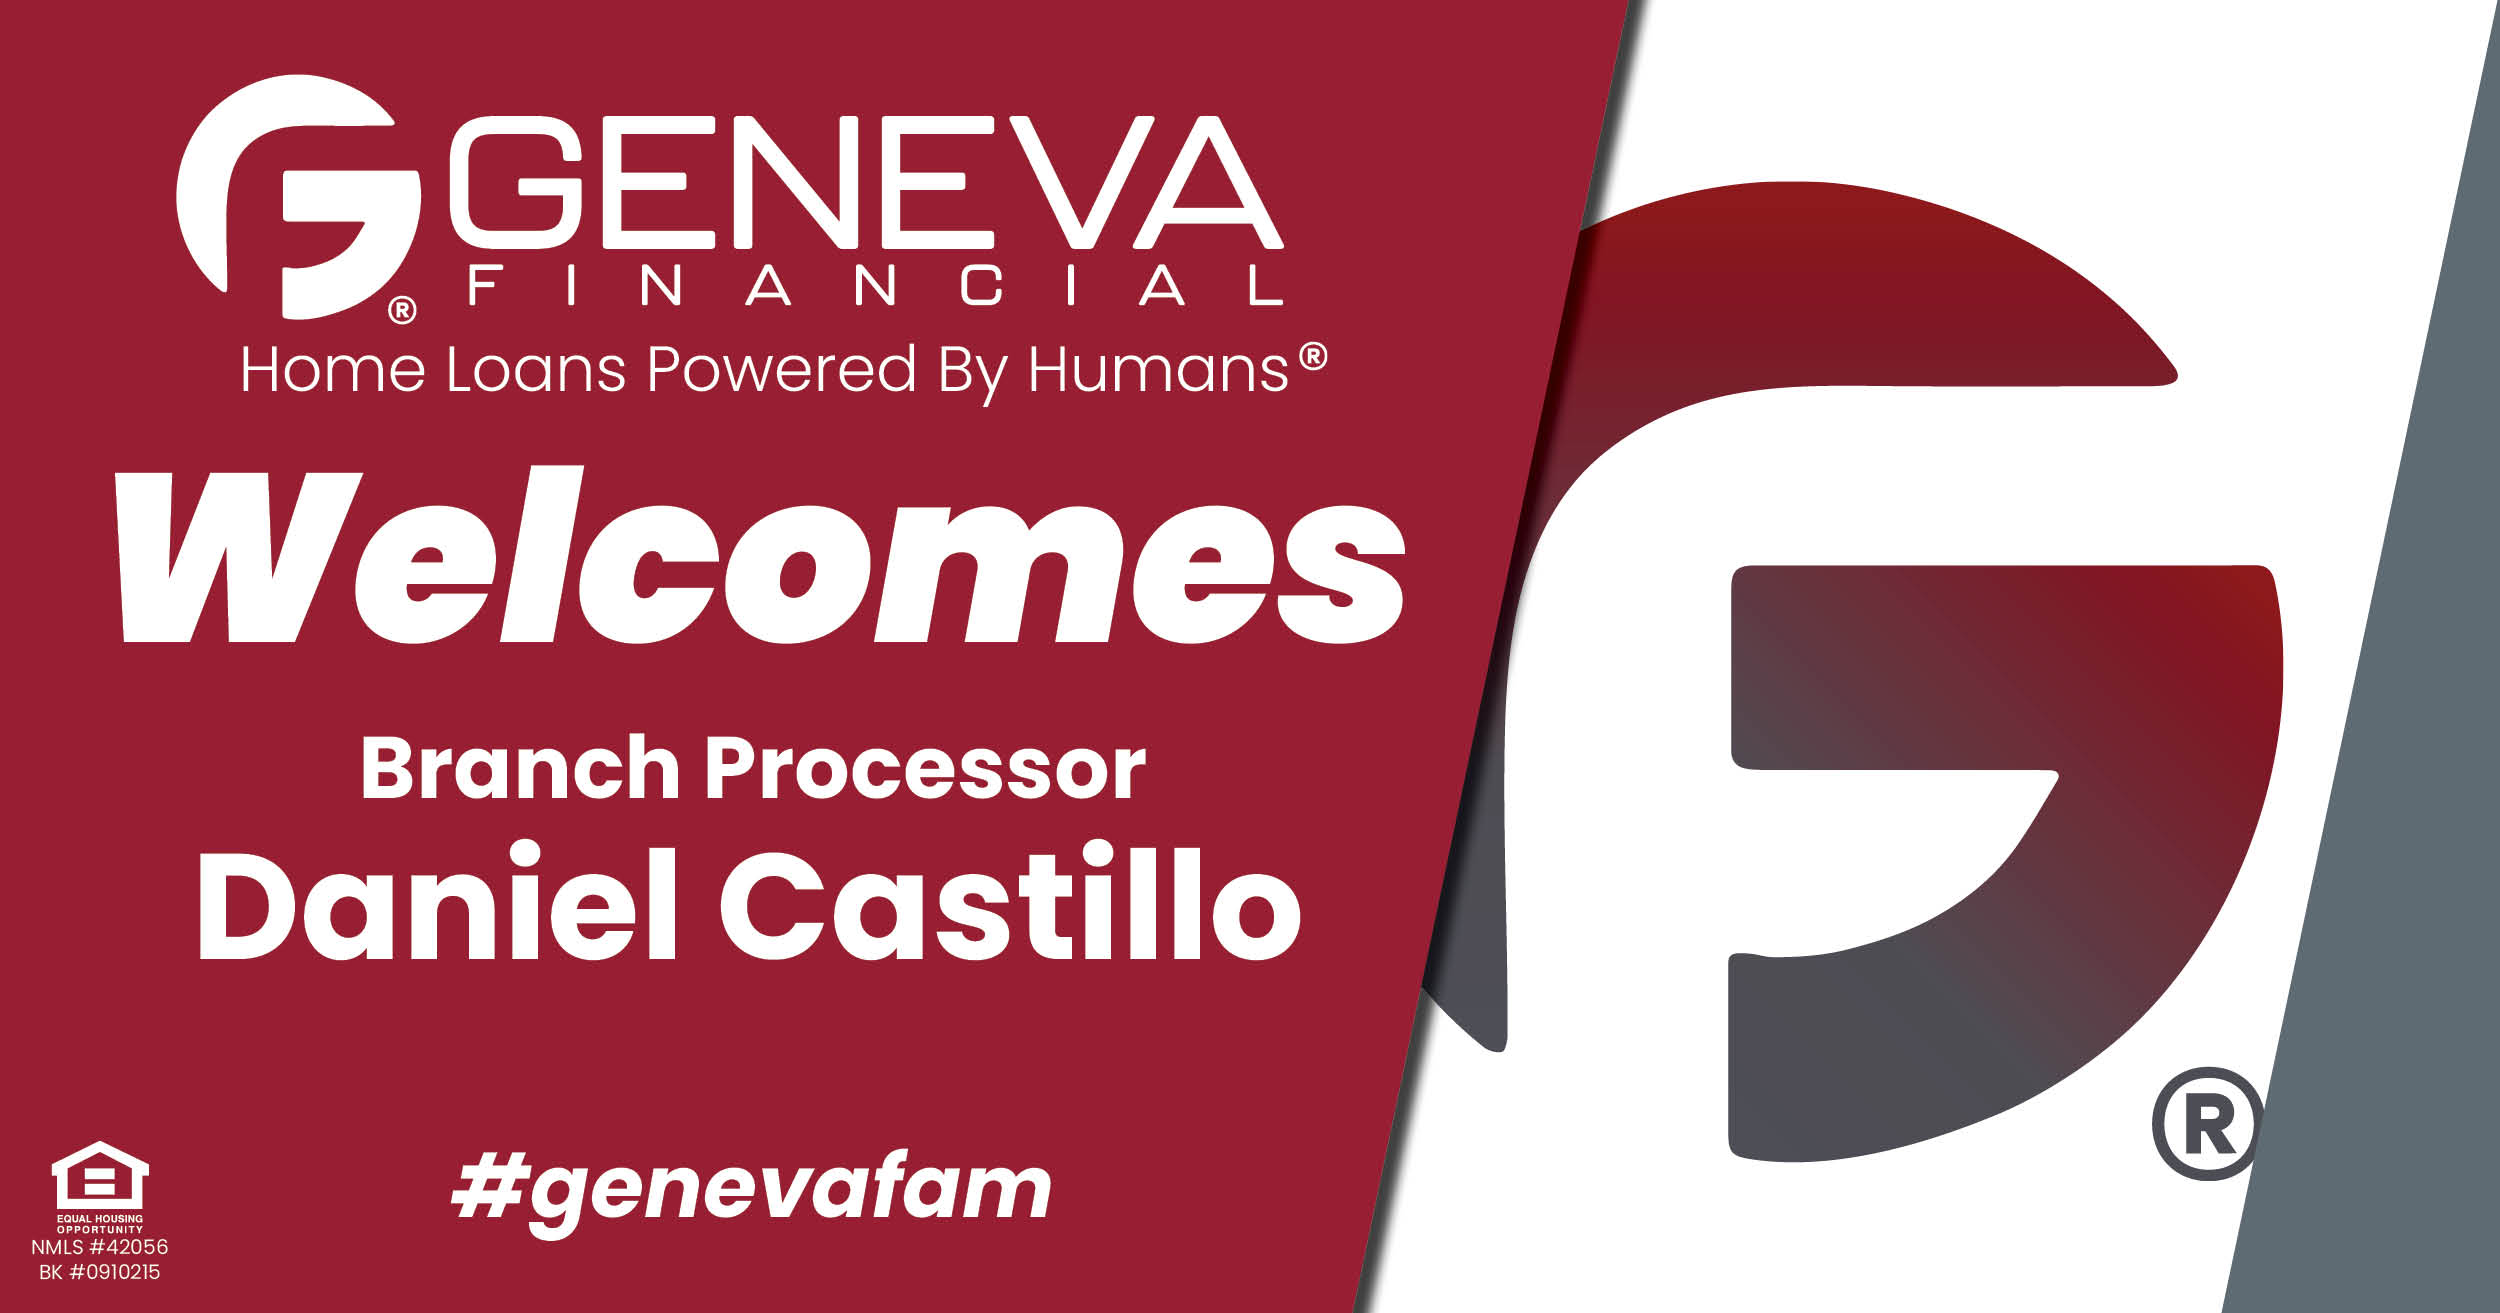 Geneva Financial Welcomes New Branch Processor Daniel Castillo to Miami, FL – Home Loans Powered by Humans®.